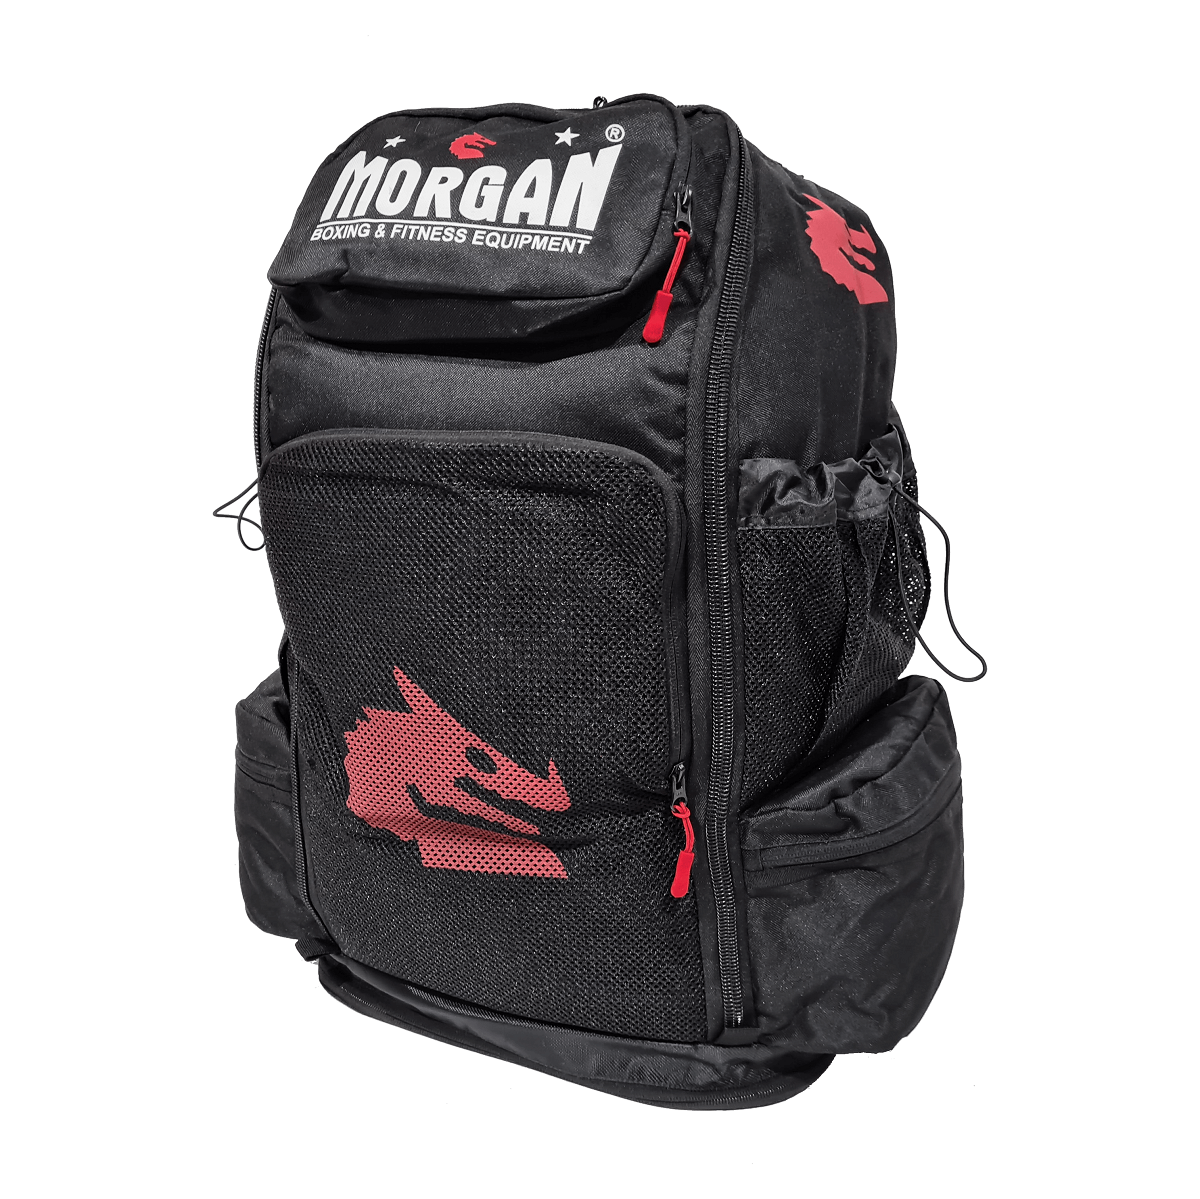 The ultimate backpack,For organised storage, the backpack has multiple mesh and zippered pockets to stash your gear, along with an additional mesh bag with drawstring closure to air out other items after training or competition..Black with mesh pockets